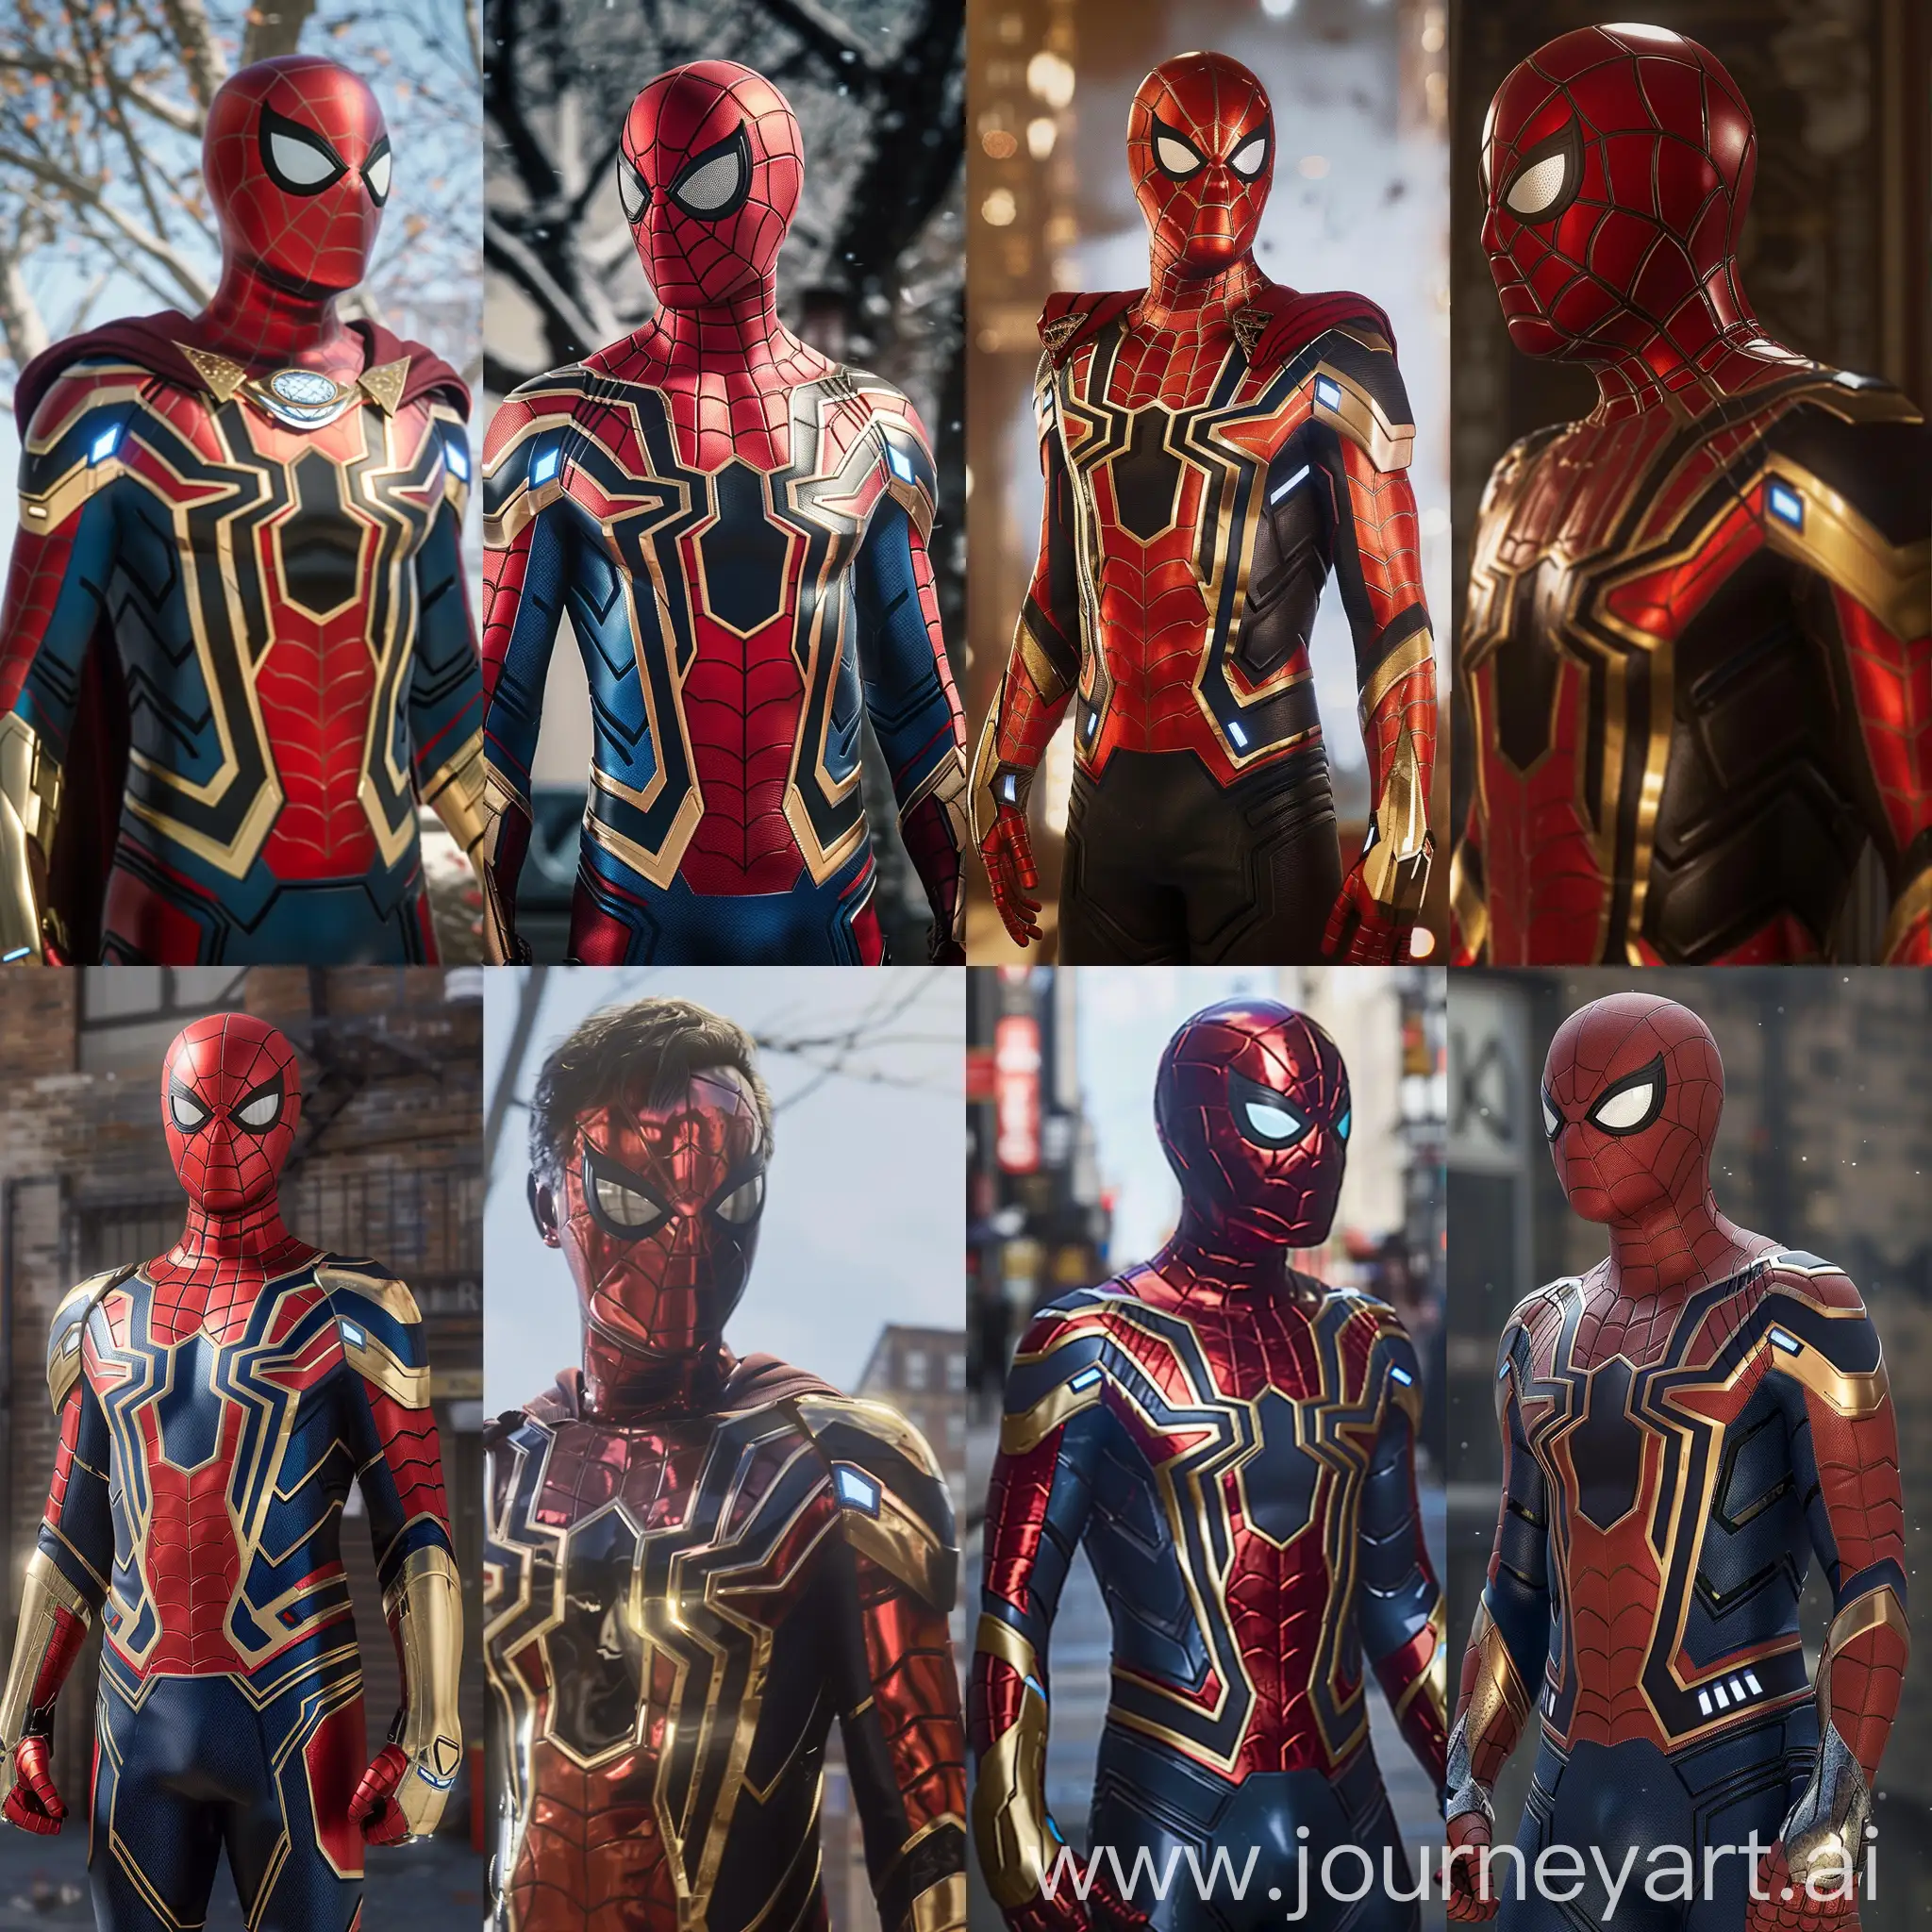 Combination of Dr strange and iron spider suit